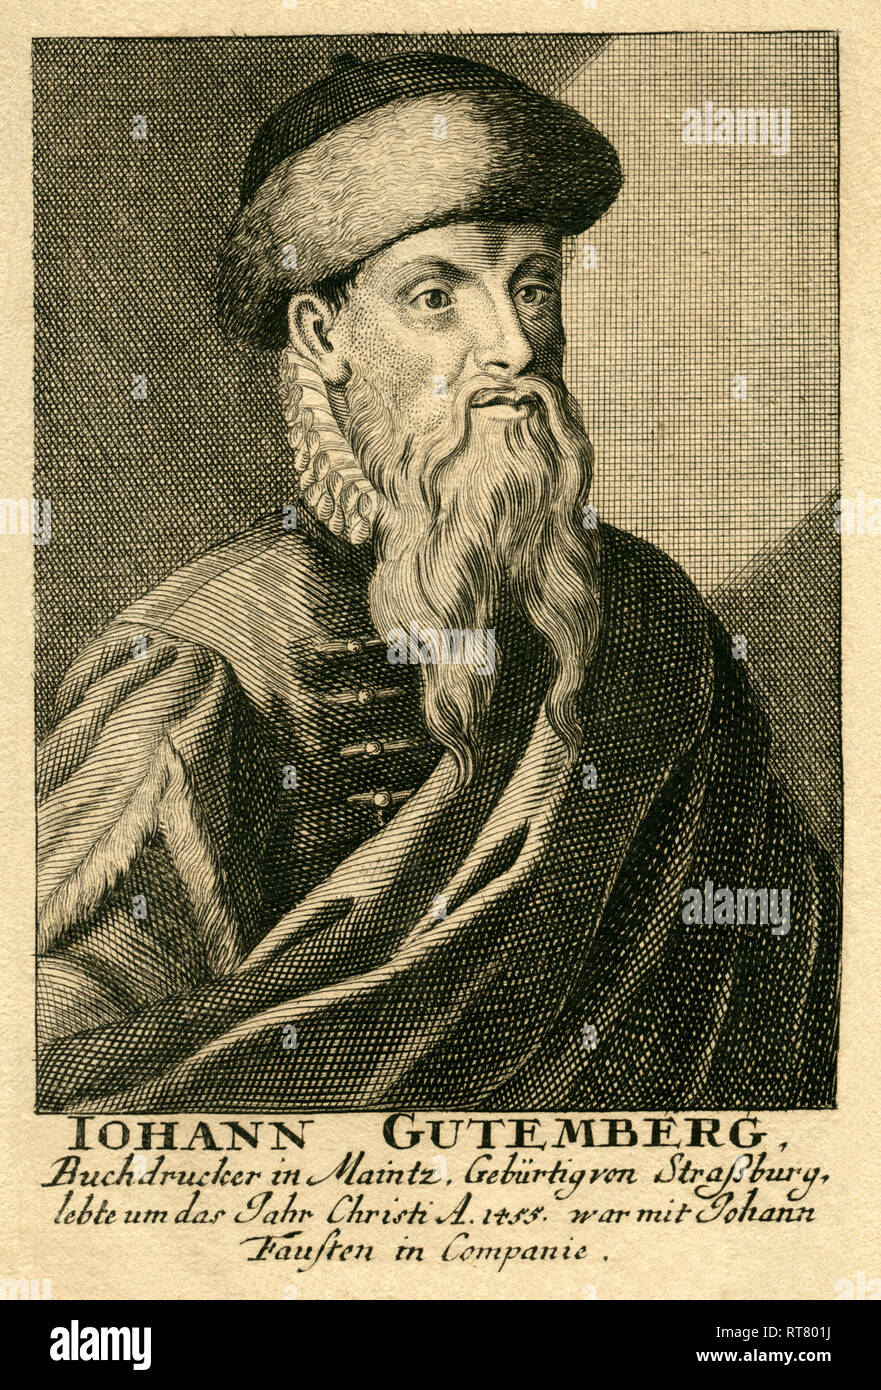 Johannes Gutenberg, book printer in Mainz, copperplate engraving, around 1725, Artist's Copyright has not to be cleared Stock Photo